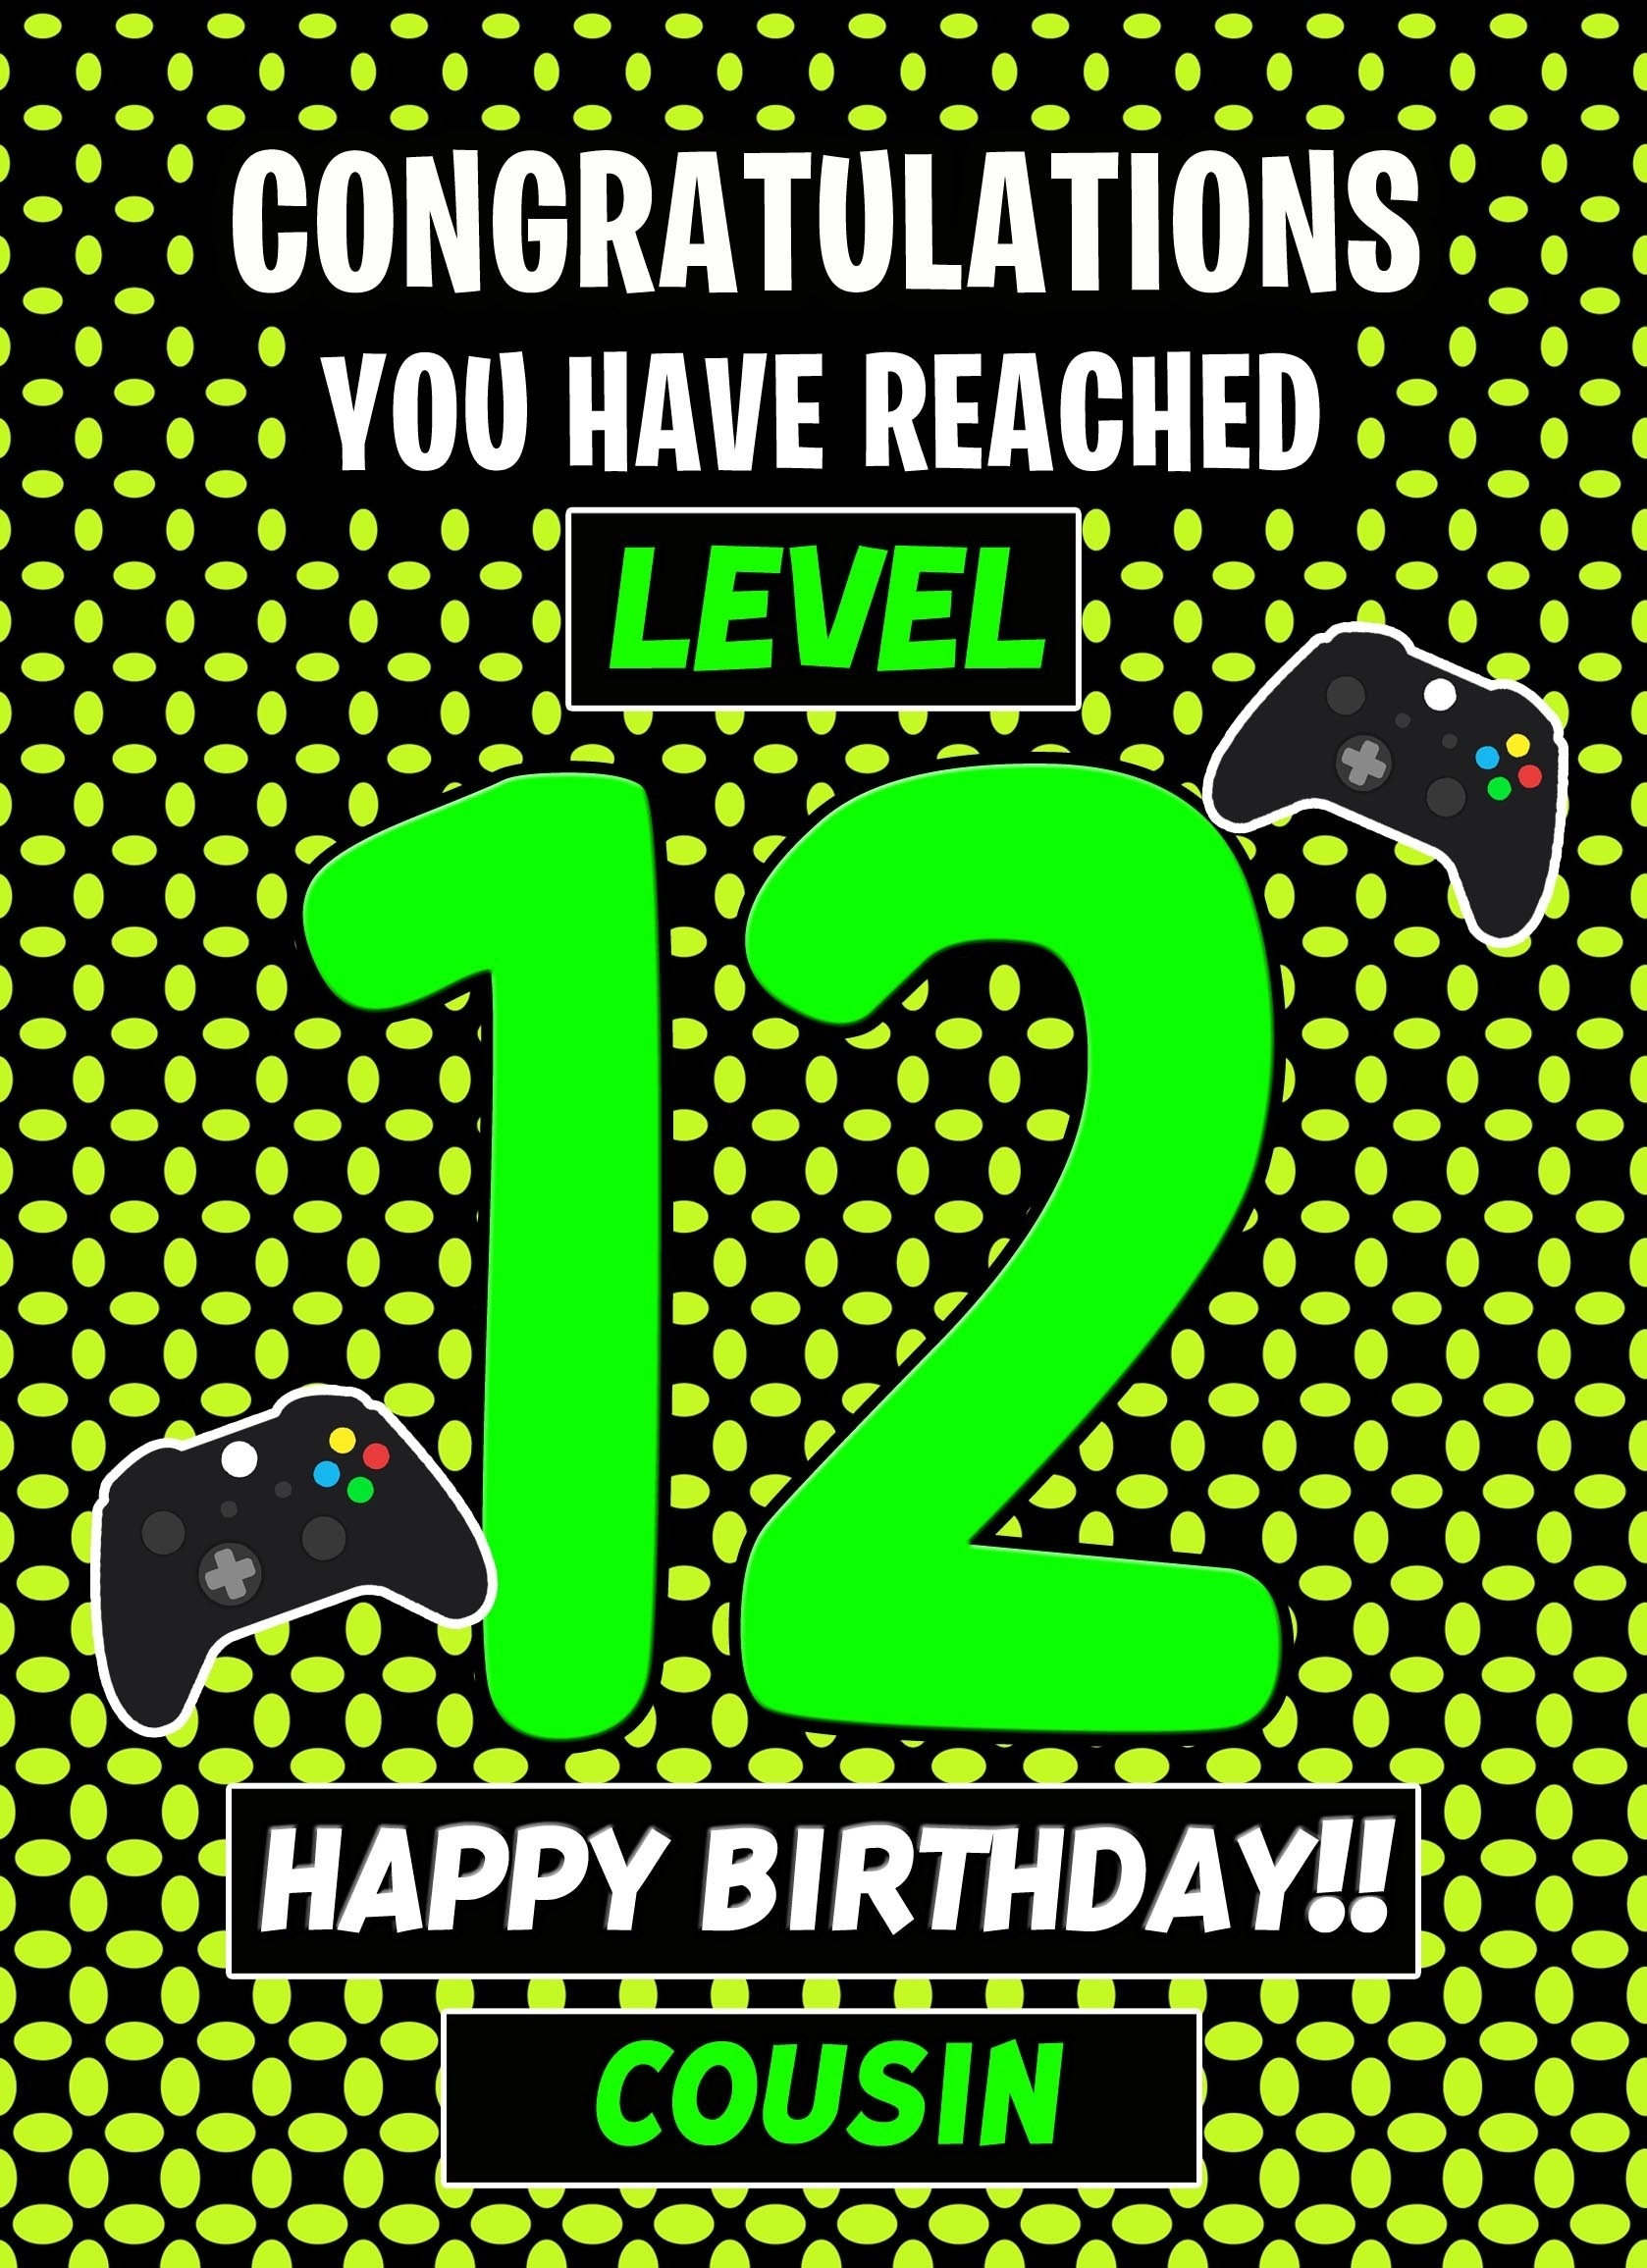 Cousin 12th Birthday Card (Level Up Gamer)